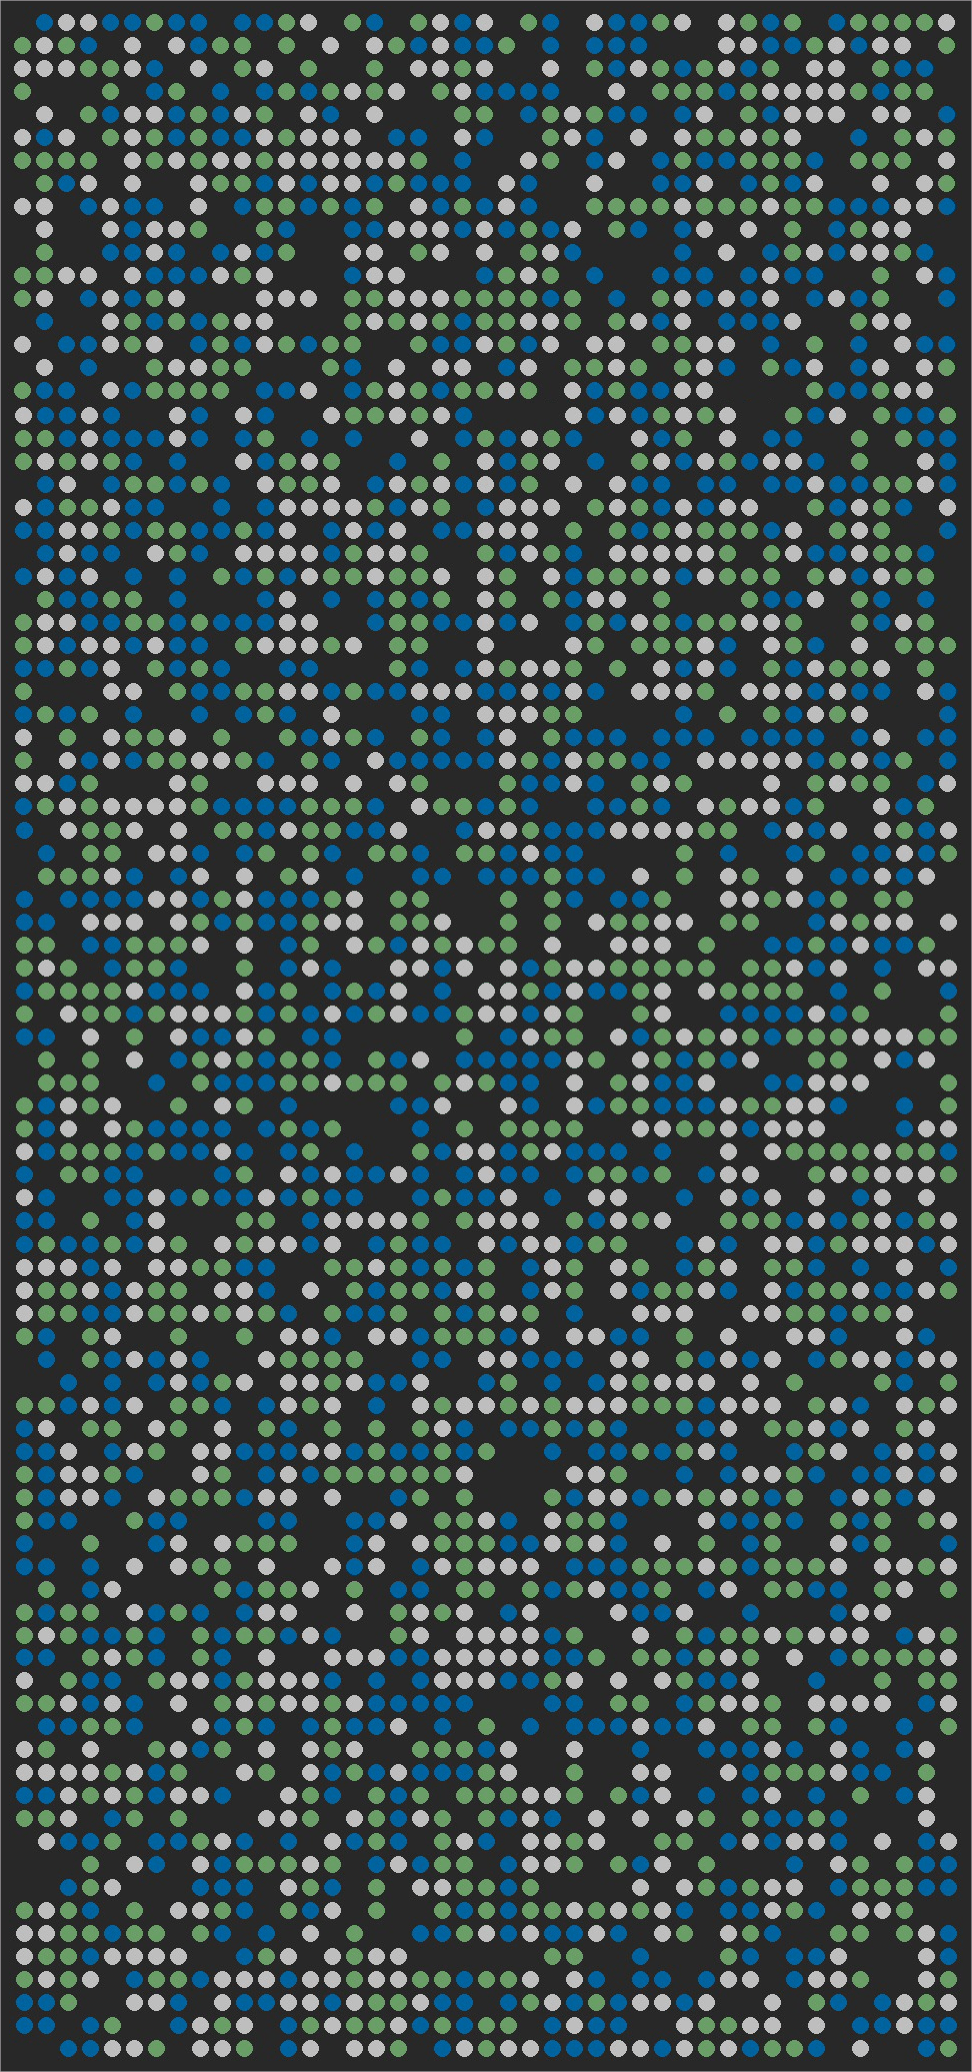 DNA_sequence%2C_Nucleotide_sequence.gif